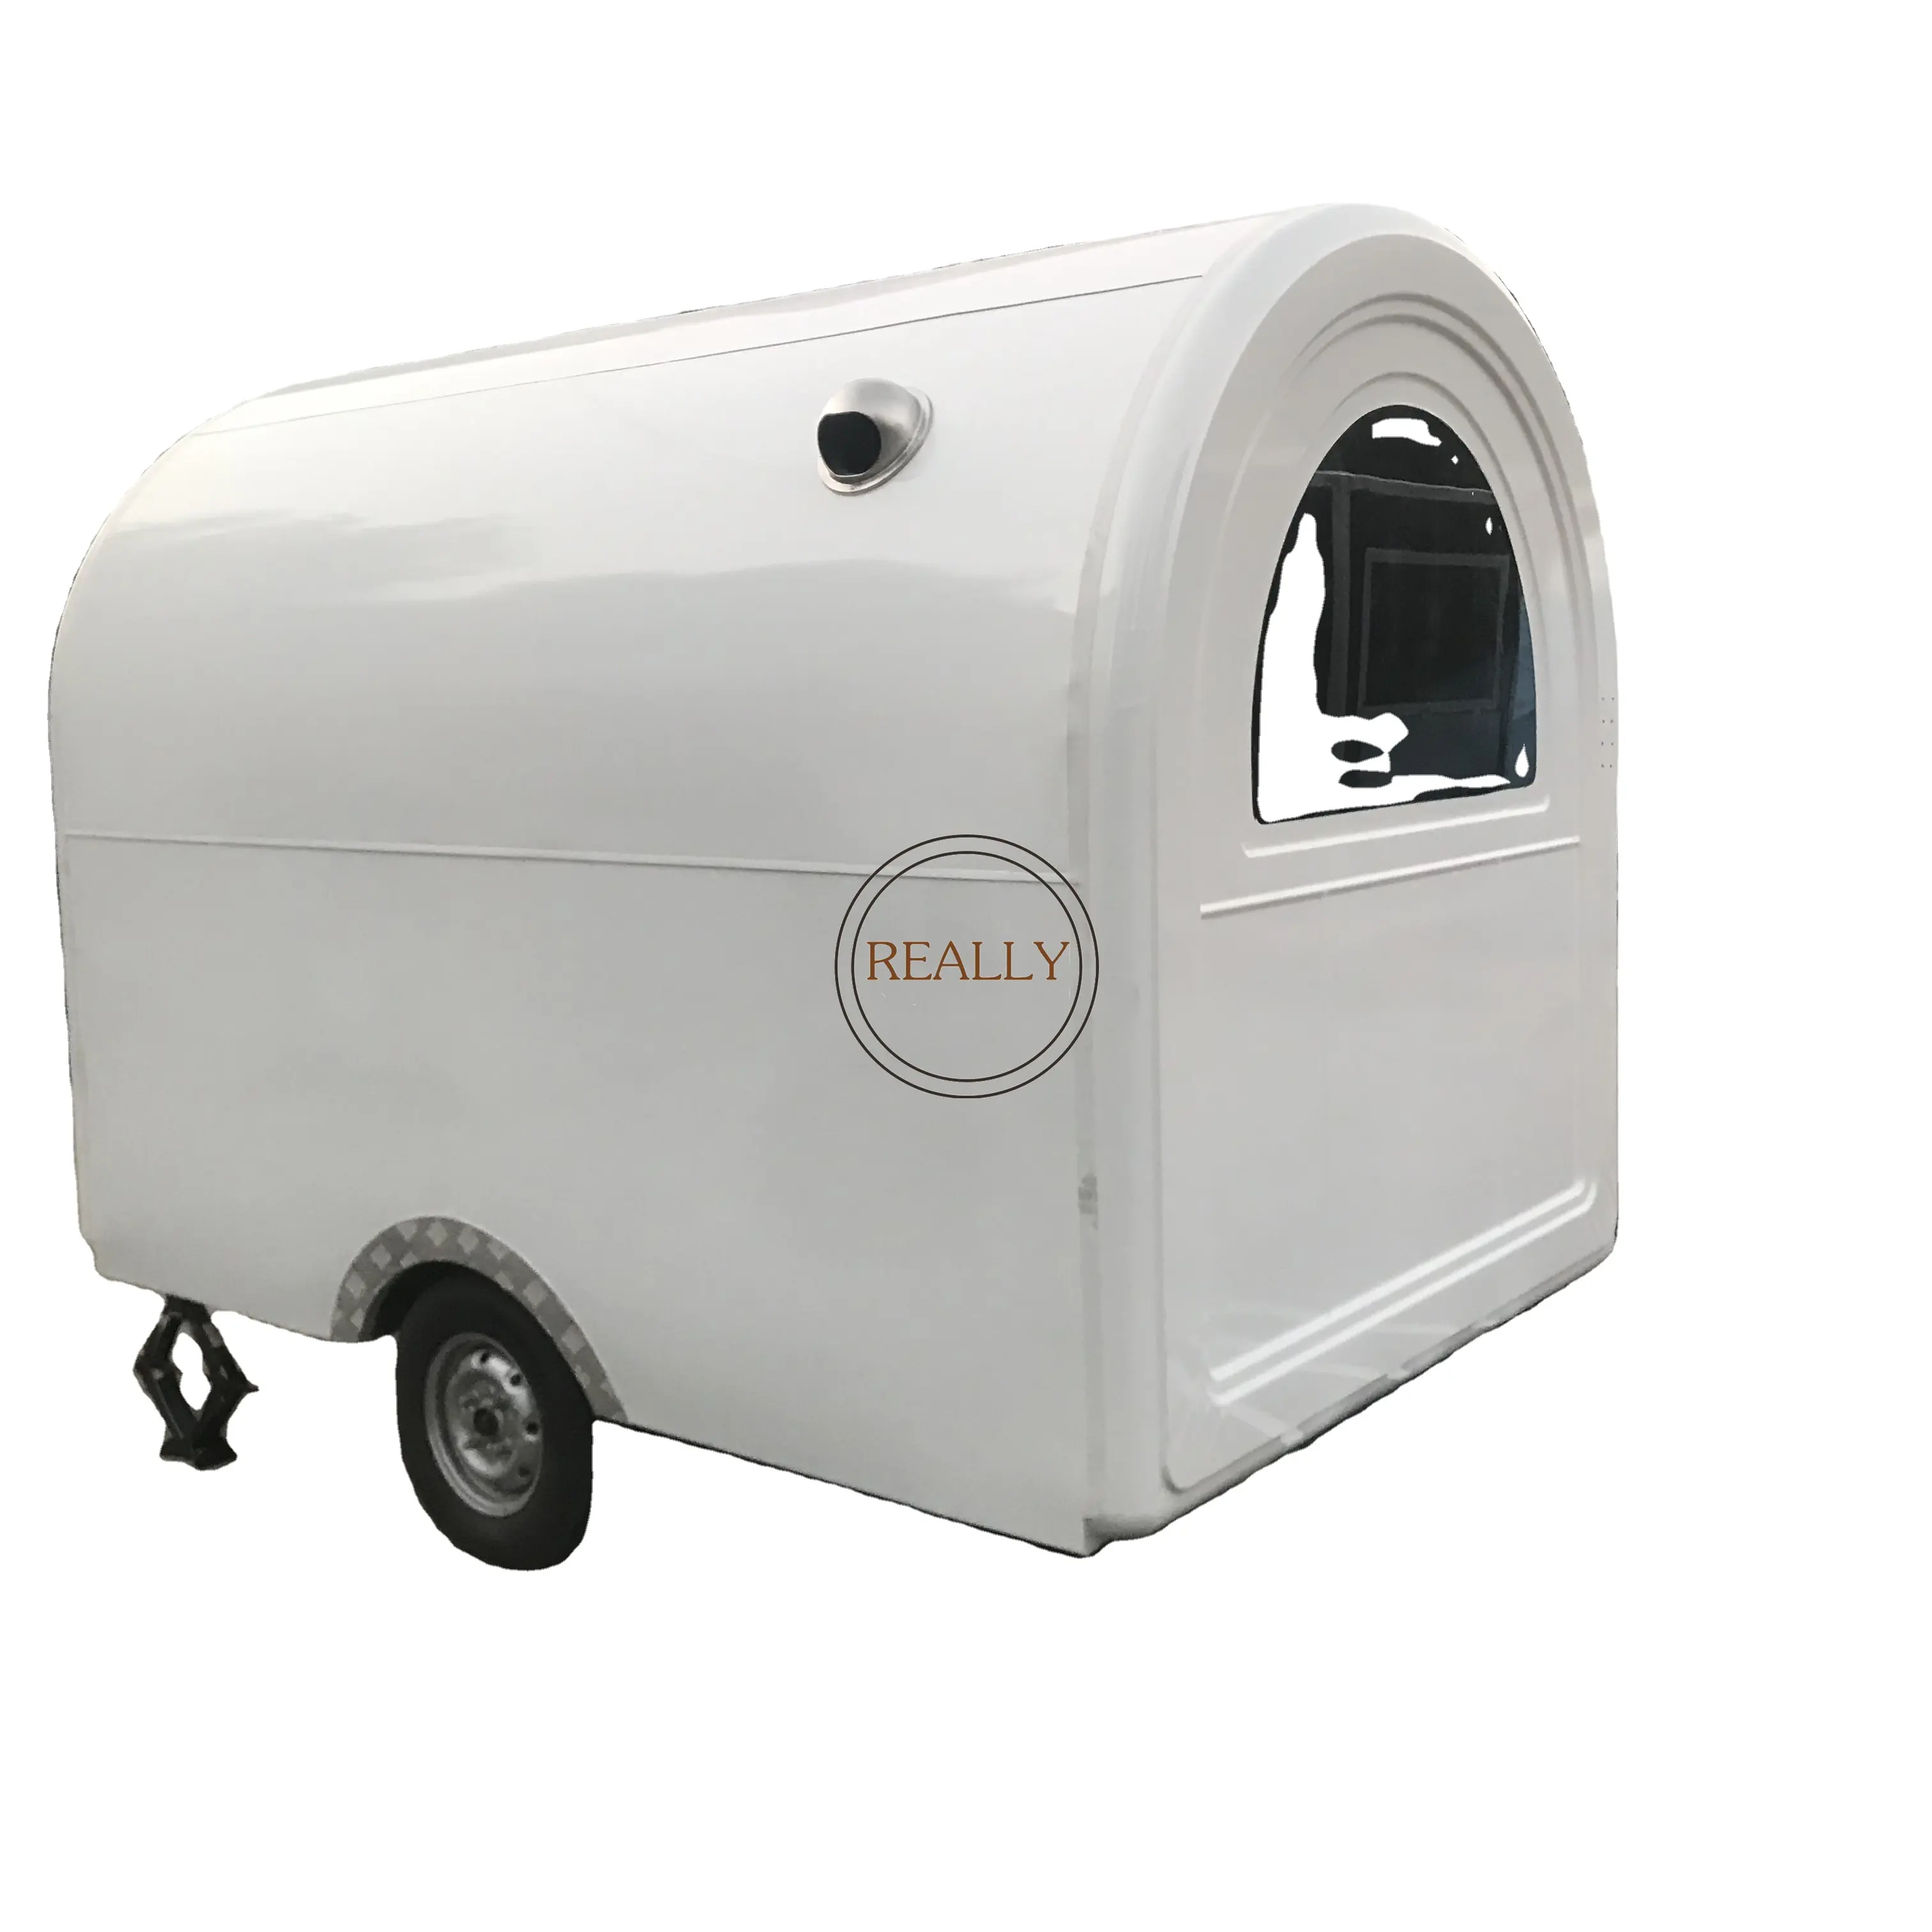 Customized White Mobile Fast Food Trailer Coffee Ice Cream Snack Newspaper Kiosk Truck For Sale